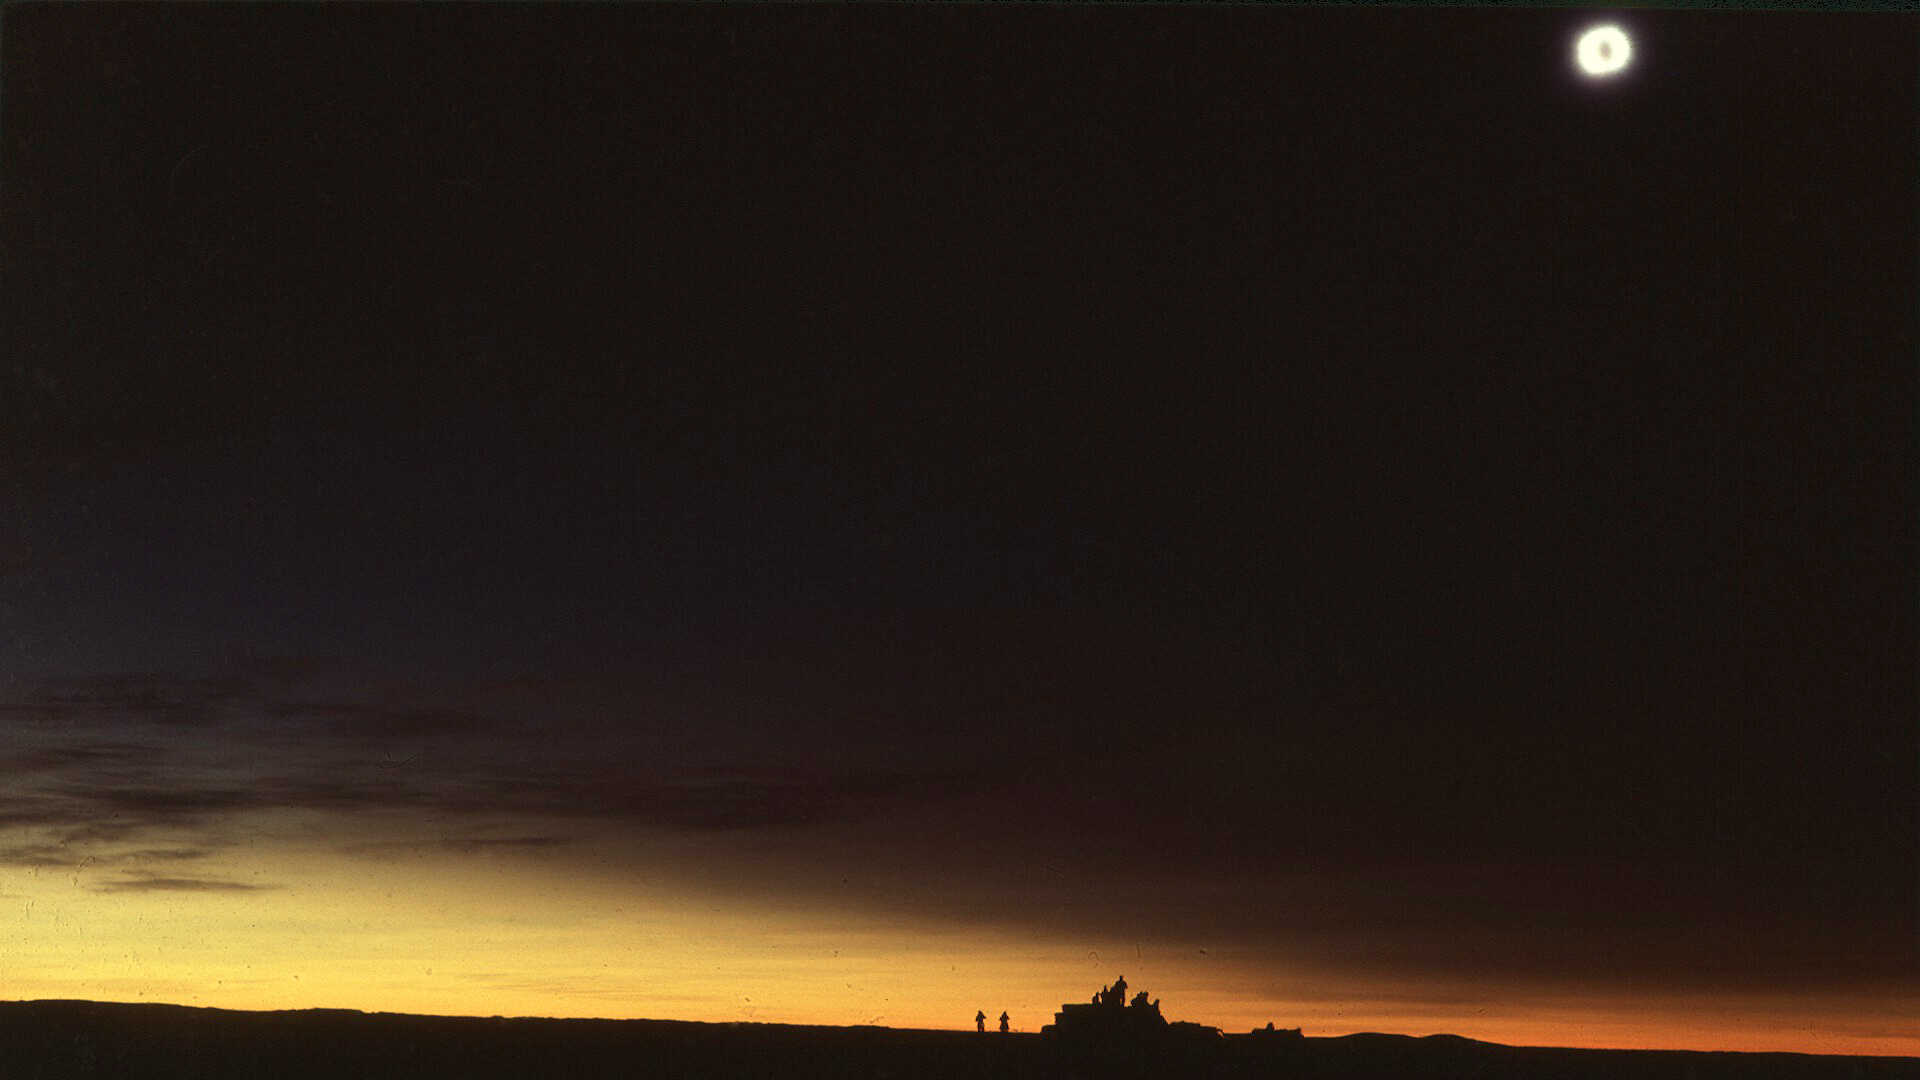 The sky and surrounding landscape, during mid-totality of the total solar eclipse of February 26, 1979 from Roy, Montana.